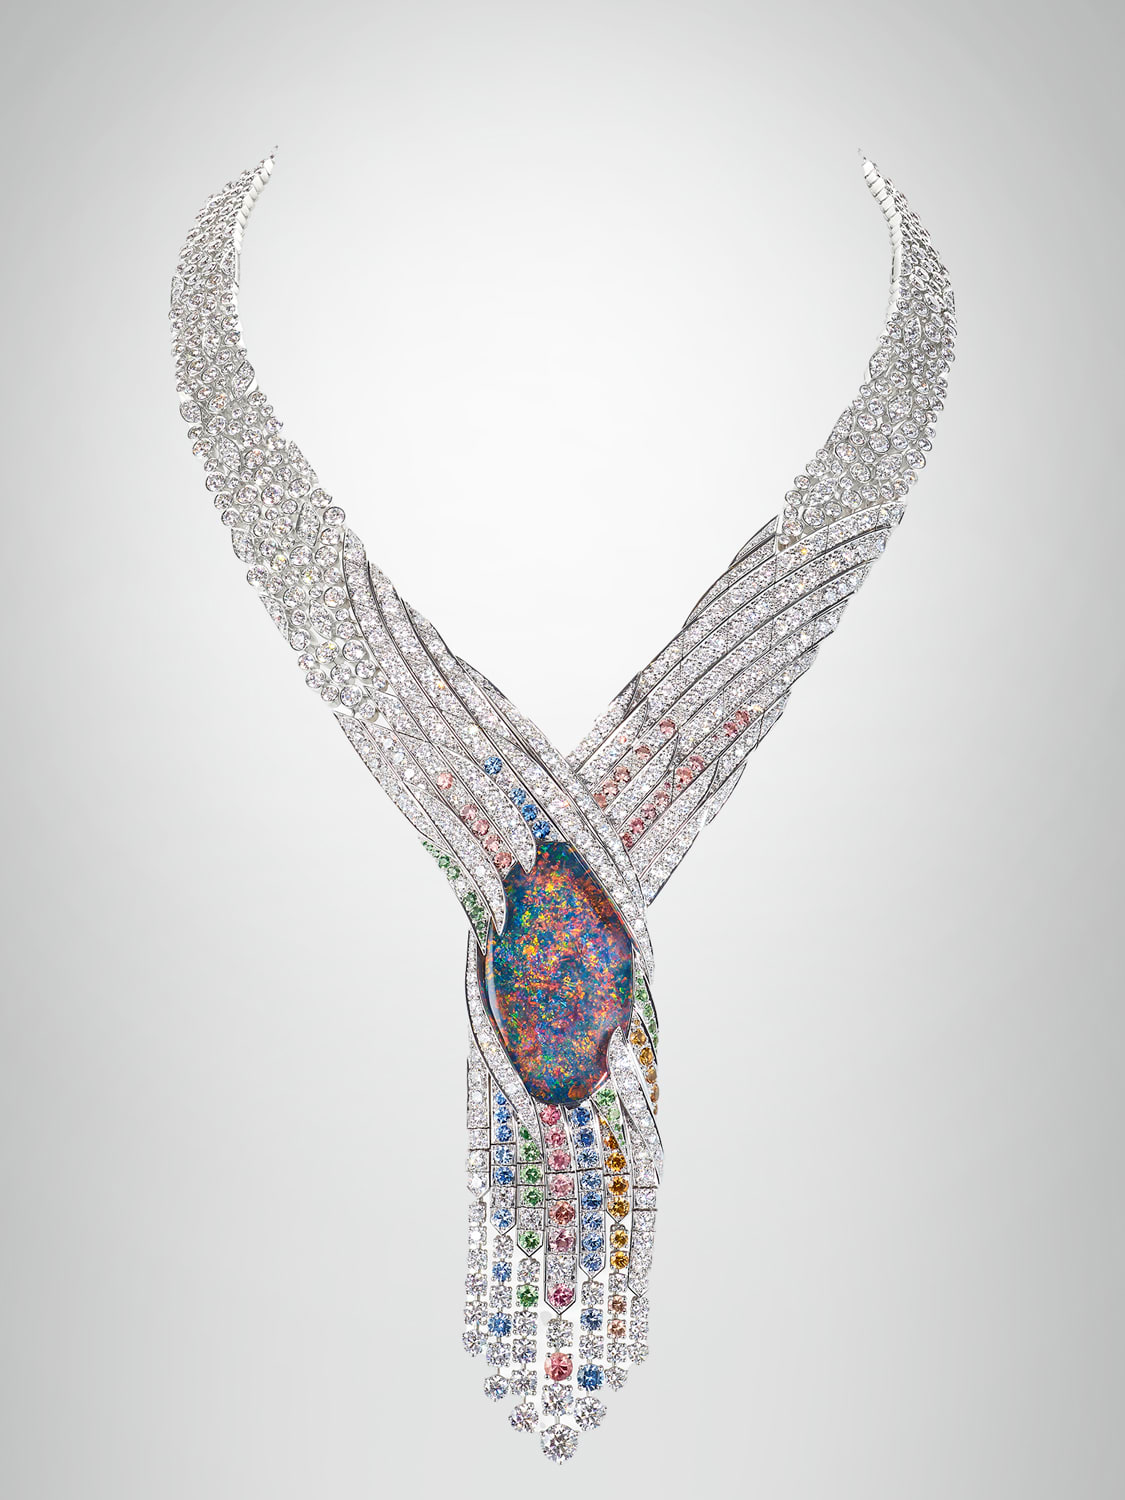 Piaget Unveils Its New High Jewelry Collection, Metaphoria